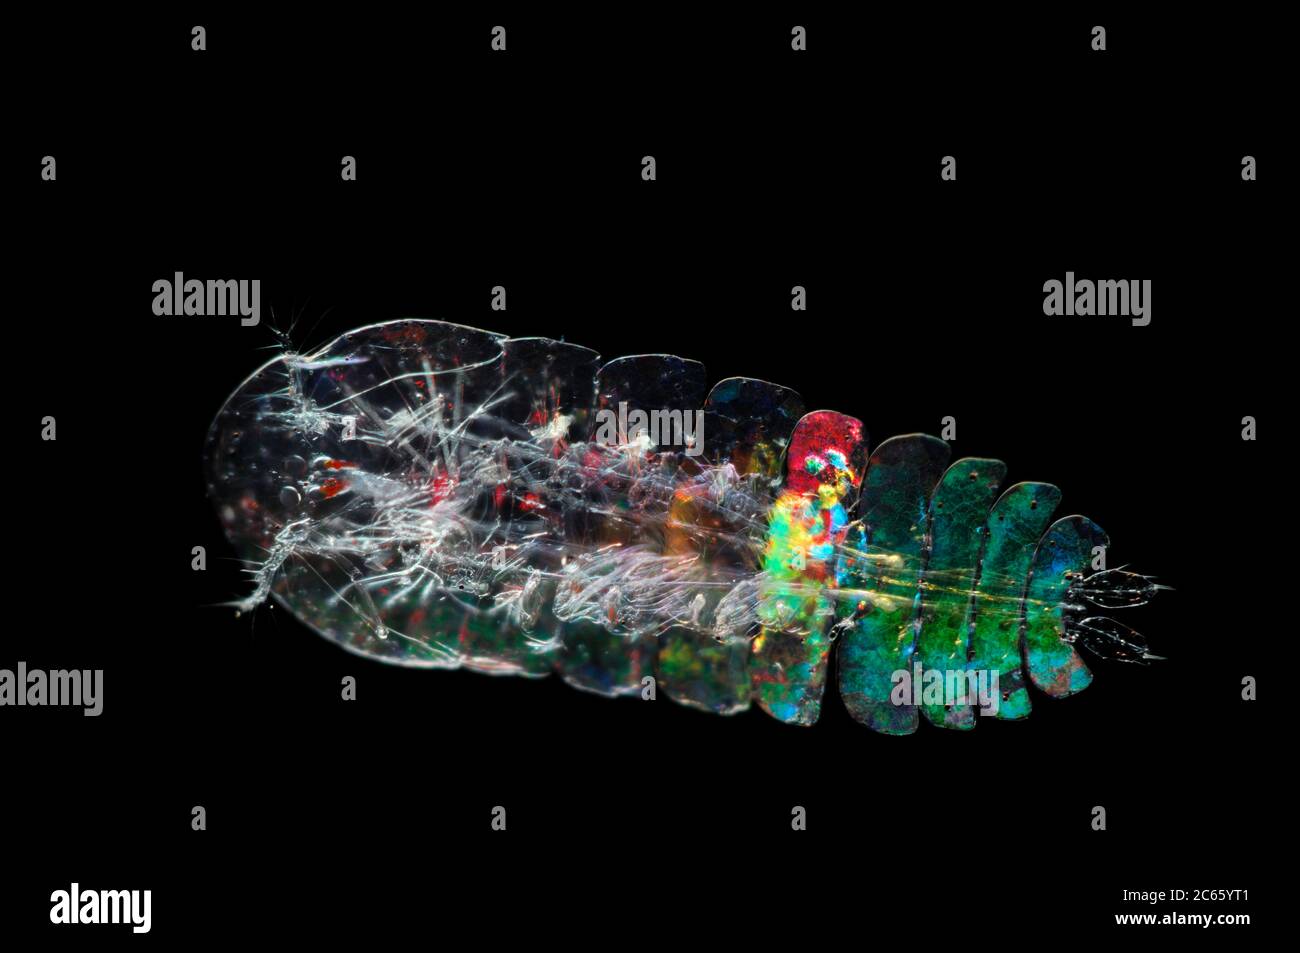 [Digital focus stacking] Marine Planktonic Copepod (Sapphirina sp.) Sapphirina, also called the sea sapphires is a copepod how is diffracting light with his exoskeleton [size of single organism: 1 mm] Stock Photo